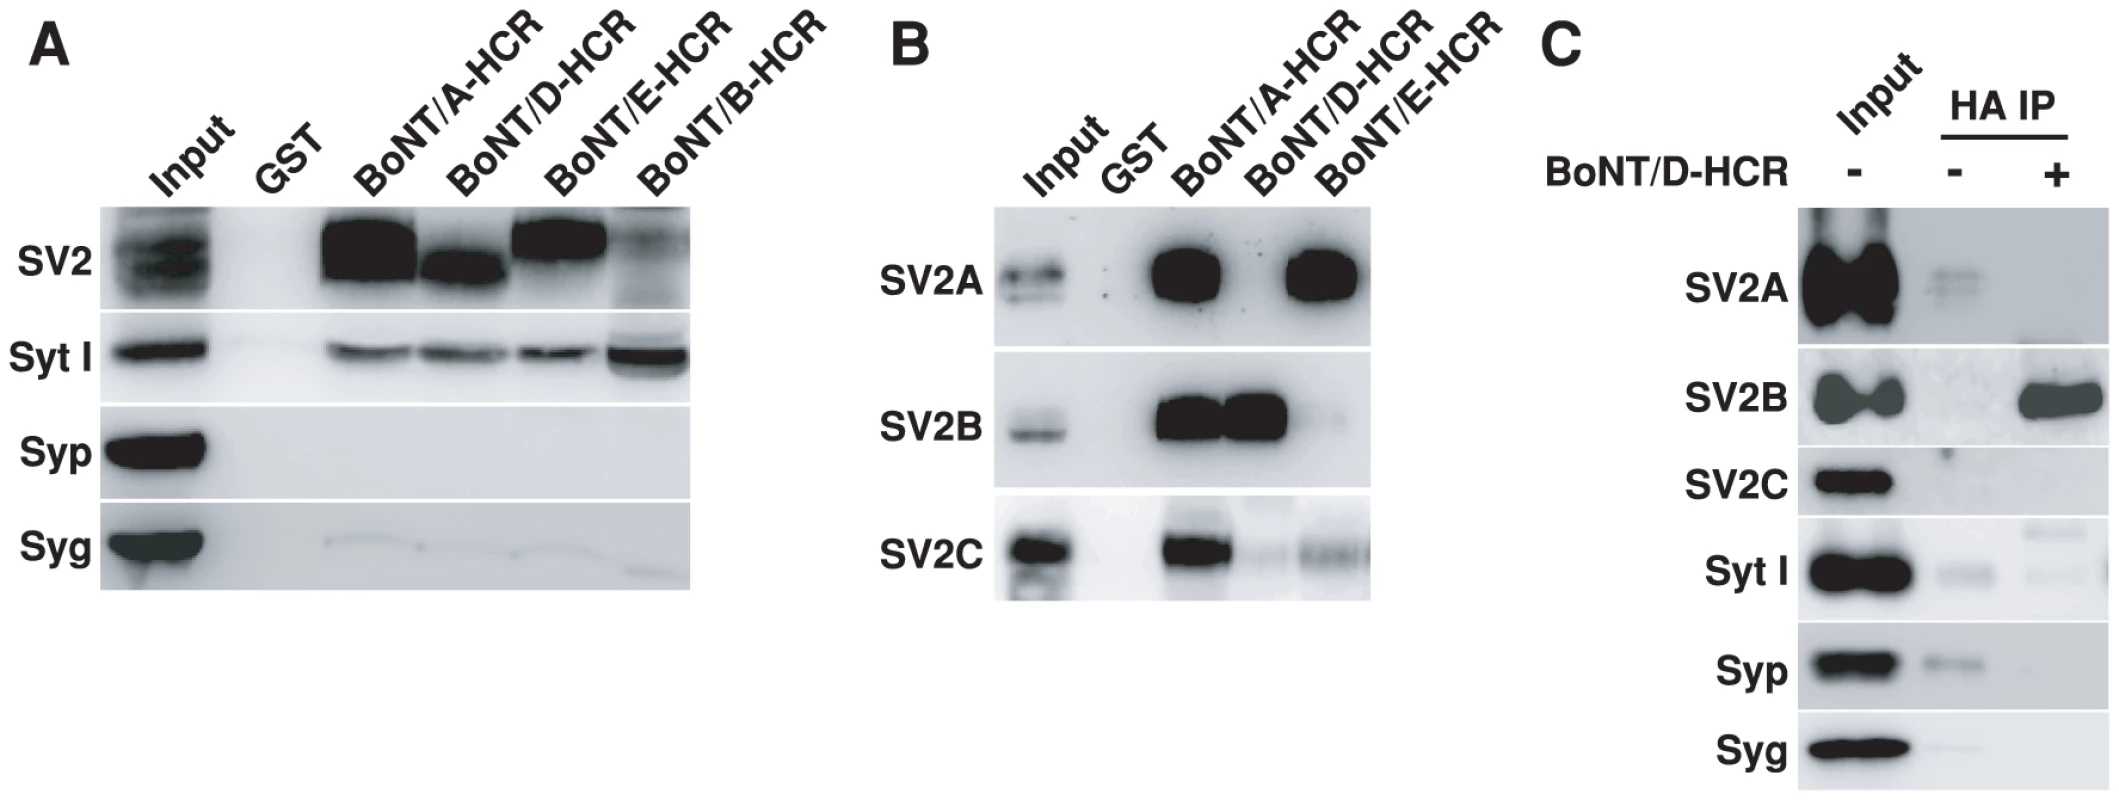 BoNT/D-HCR can pull-down and co-immunoprecipitate SV2 from rat brain detergent extracts.